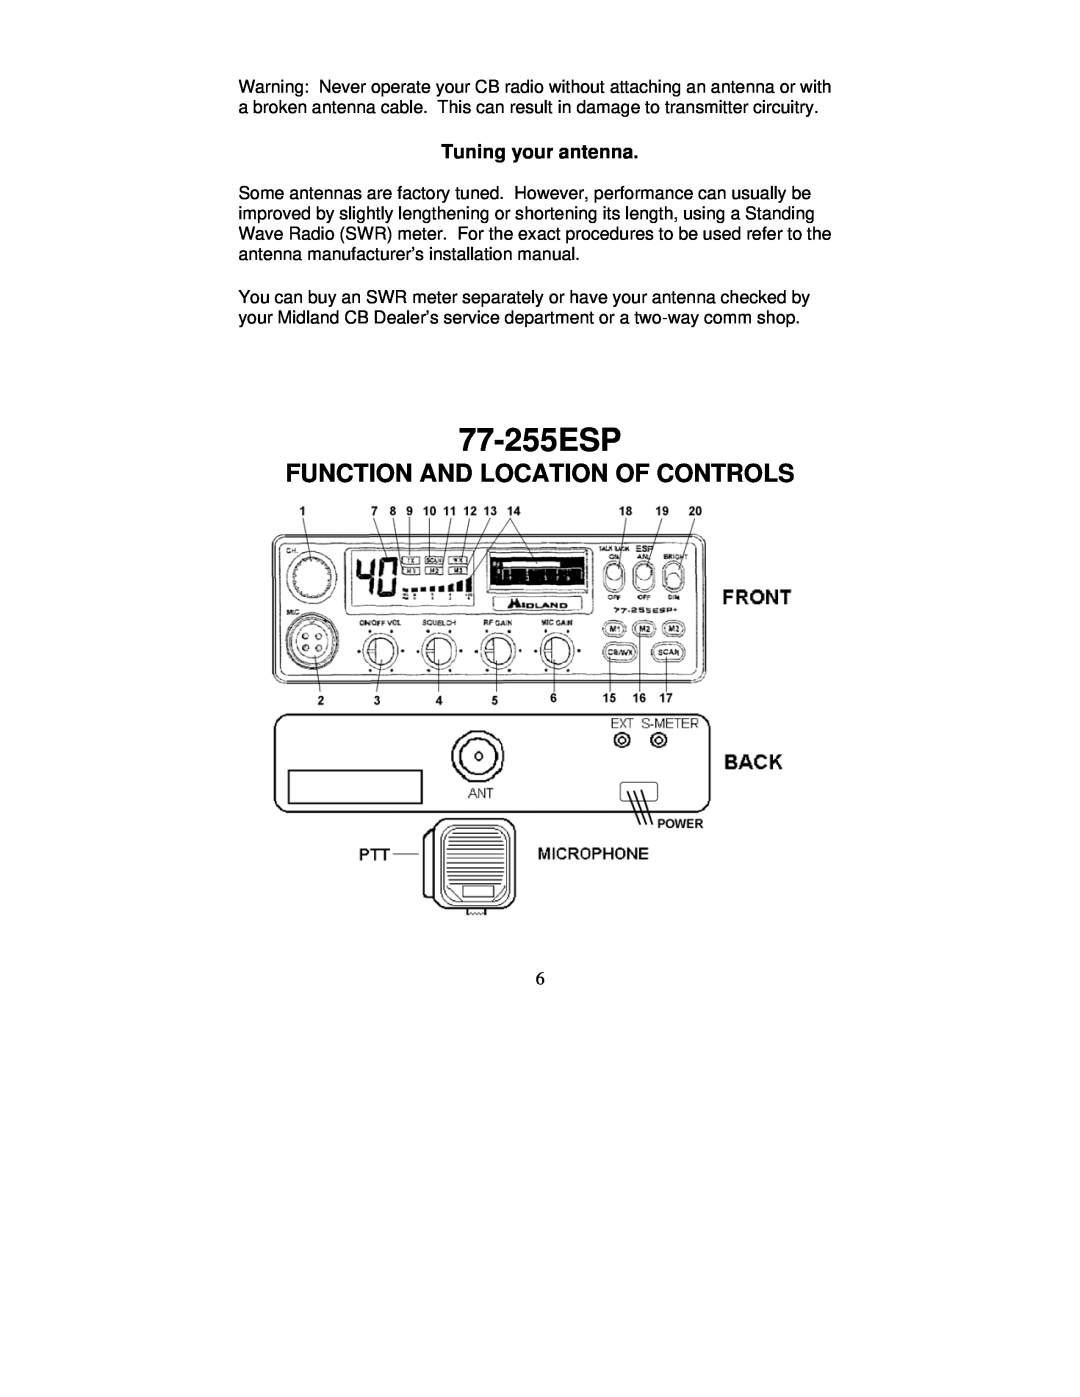 Midland Radio 77-255ESP manual Function And Location Of Controls, Tuning your antenna 